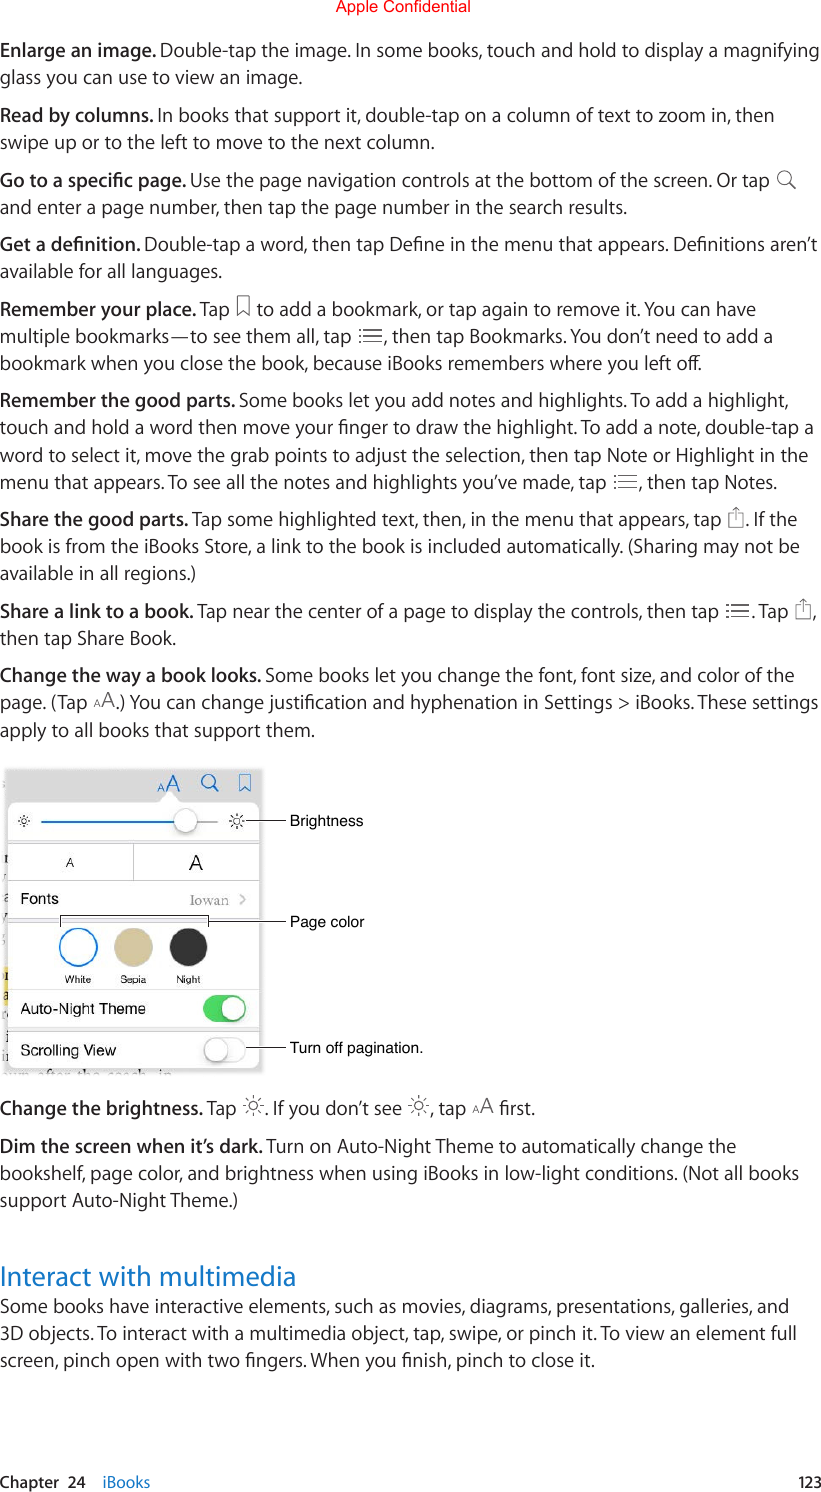 Chapter  24    iBooks  123Enlarge an image. Double-tap the image. In some books, touch and hold to display a magnifying glass you can use to view an image.Read by columns. In books that support it, double-tap on a column of text to zoom in, then swipe up or to the left to move to the next column.Go to a specic page. Use the page navigation controls at the bottom of the screen. Or tap and enter a page number, then tap the page number in the search results.Get a denition. Double-tapaword,thentapDeneinthemenuthatappears.Denitionsaren’tavailable for all languages.Remember your place. Tap   to add a bookmark, or tap again to remove it. You can have multiple bookmarks—to see them all, tap  , then tap Bookmarks. You don’t need to add a bookmarkwhenyouclosethebook,becauseiBooksrememberswhereyoulefto.Remember the good parts. Some books let you add notes and highlights. To add a highlight, touchandholdawordthenmoveyourngertodrawthehighlight.Toaddanote,double-tapawordtoselectit,movethegrabpointstoadjusttheselection,thentapNoteorHighlightinthemenu that appears. To see all the notes and highlights you’ve made, tap  , then tap Notes.Share the good parts. Tap some highlighted text, then, in the menu that appears, tap  . If the book is from the iBooks Store, a link to the book is included automatically. (Sharing may not be available in all regions.)Share a link to a book. Tap near the center of a page to display the controls, then tap  . Tap  , then tap Share Book.Change the way a book looks. Some books let you change the font, font size, and color of the page. (Tap  .)YoucanchangejusticationandhyphenationinSettings&gt;iBooks.Thesesettingsapply to all books that support them.Page colorPage colorBrightnessBrightnessTurn off pagination.Turn off pagination.Change the brightness. Tap  . If you don’t see  , tap  rst.Dim the screen when it’s dark. Turn on Auto-Night Theme to automatically change the bookshelf, page color, and brightness when using iBooks in low-light conditions. (Not all books support Auto-Night Theme.)Interact with multimediaSome books have interactive elements, such as movies, diagrams, presentations, galleries, and 3Dobjects.Tointeractwithamultimediaobject,tap,swipe,orpinchit.Toviewanelementfullscreen,pinchopenwithtwongers.Whenyounish,pinchtocloseit.Apple Confidential